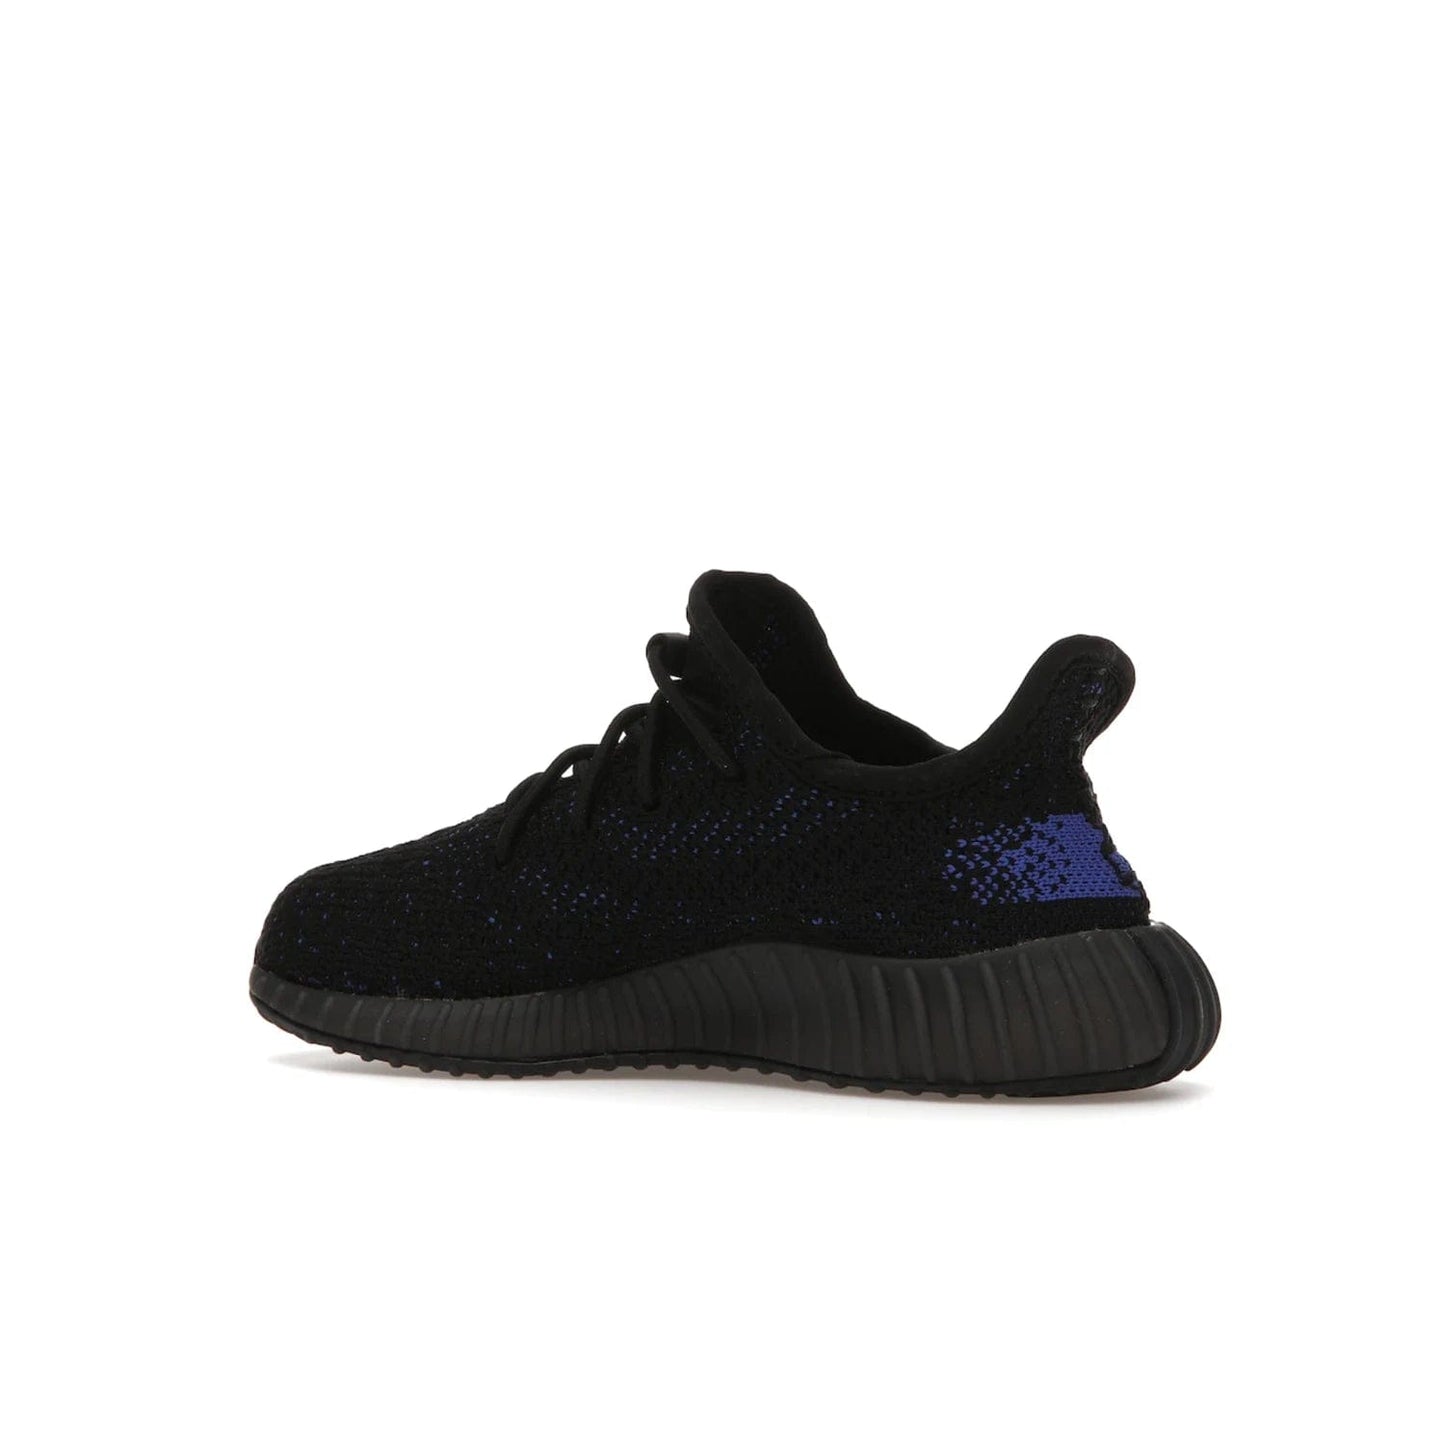 adidas Yeezy Boost 350 V2 Dazzling Blue (Kids) - Image 22 - Only at www.BallersClubKickz.com - Shop the adidas Yeezy Boost 350 V2 Dazzling Blue (Kids). Features a black Primeknit upper with a royal blue 'SPLY-350' streak and a full-length Boost midsole. Durable rubber outsole provides plenty of traction. Available for $160.